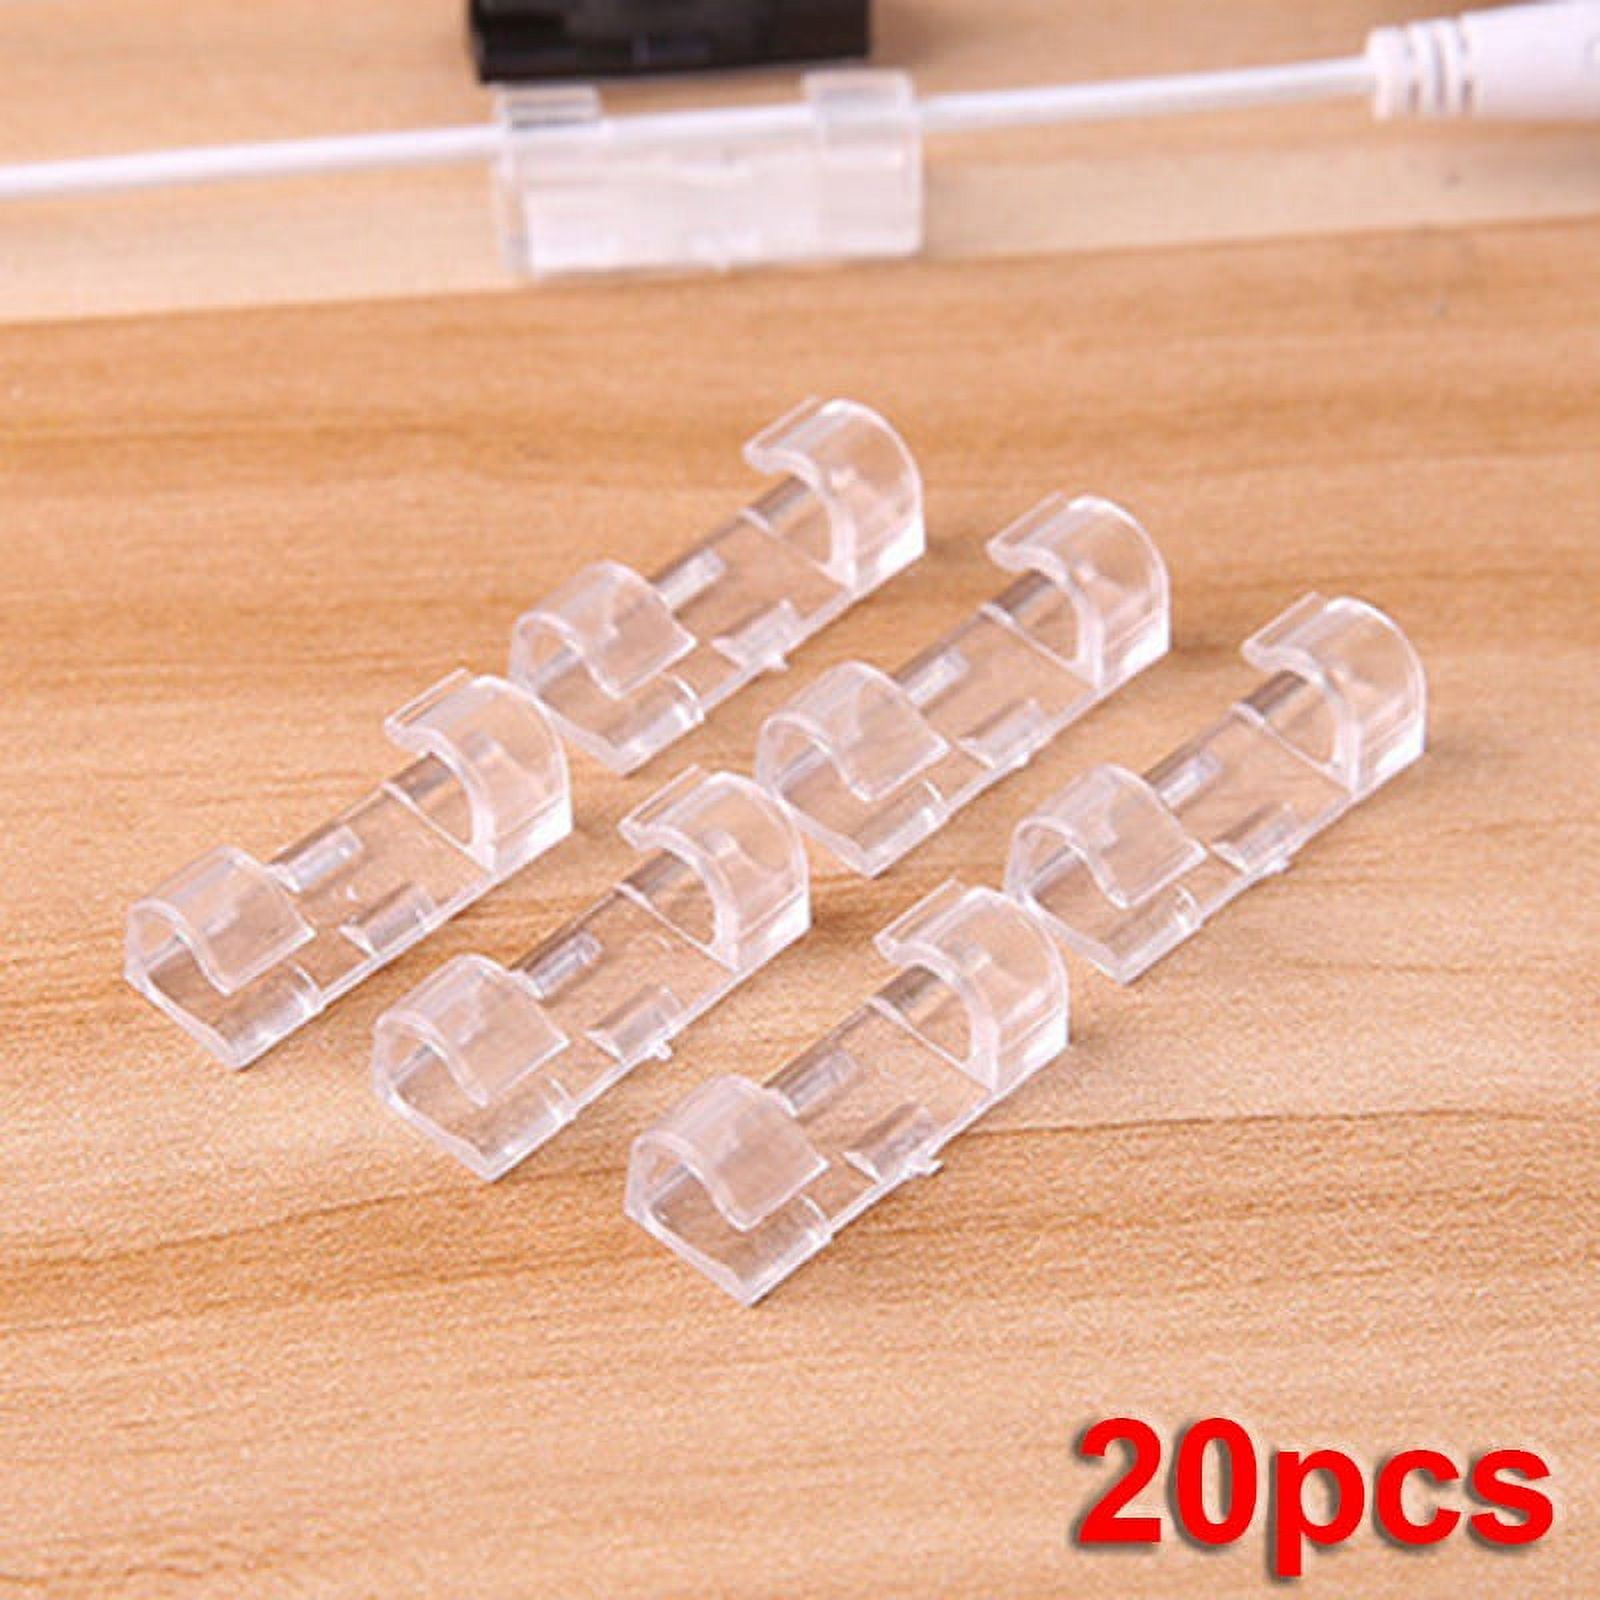 Sufanic 20Pcs Self Stick Wire Cable Cord Clips Clamp Table Wall Tidy  Organizer Holder